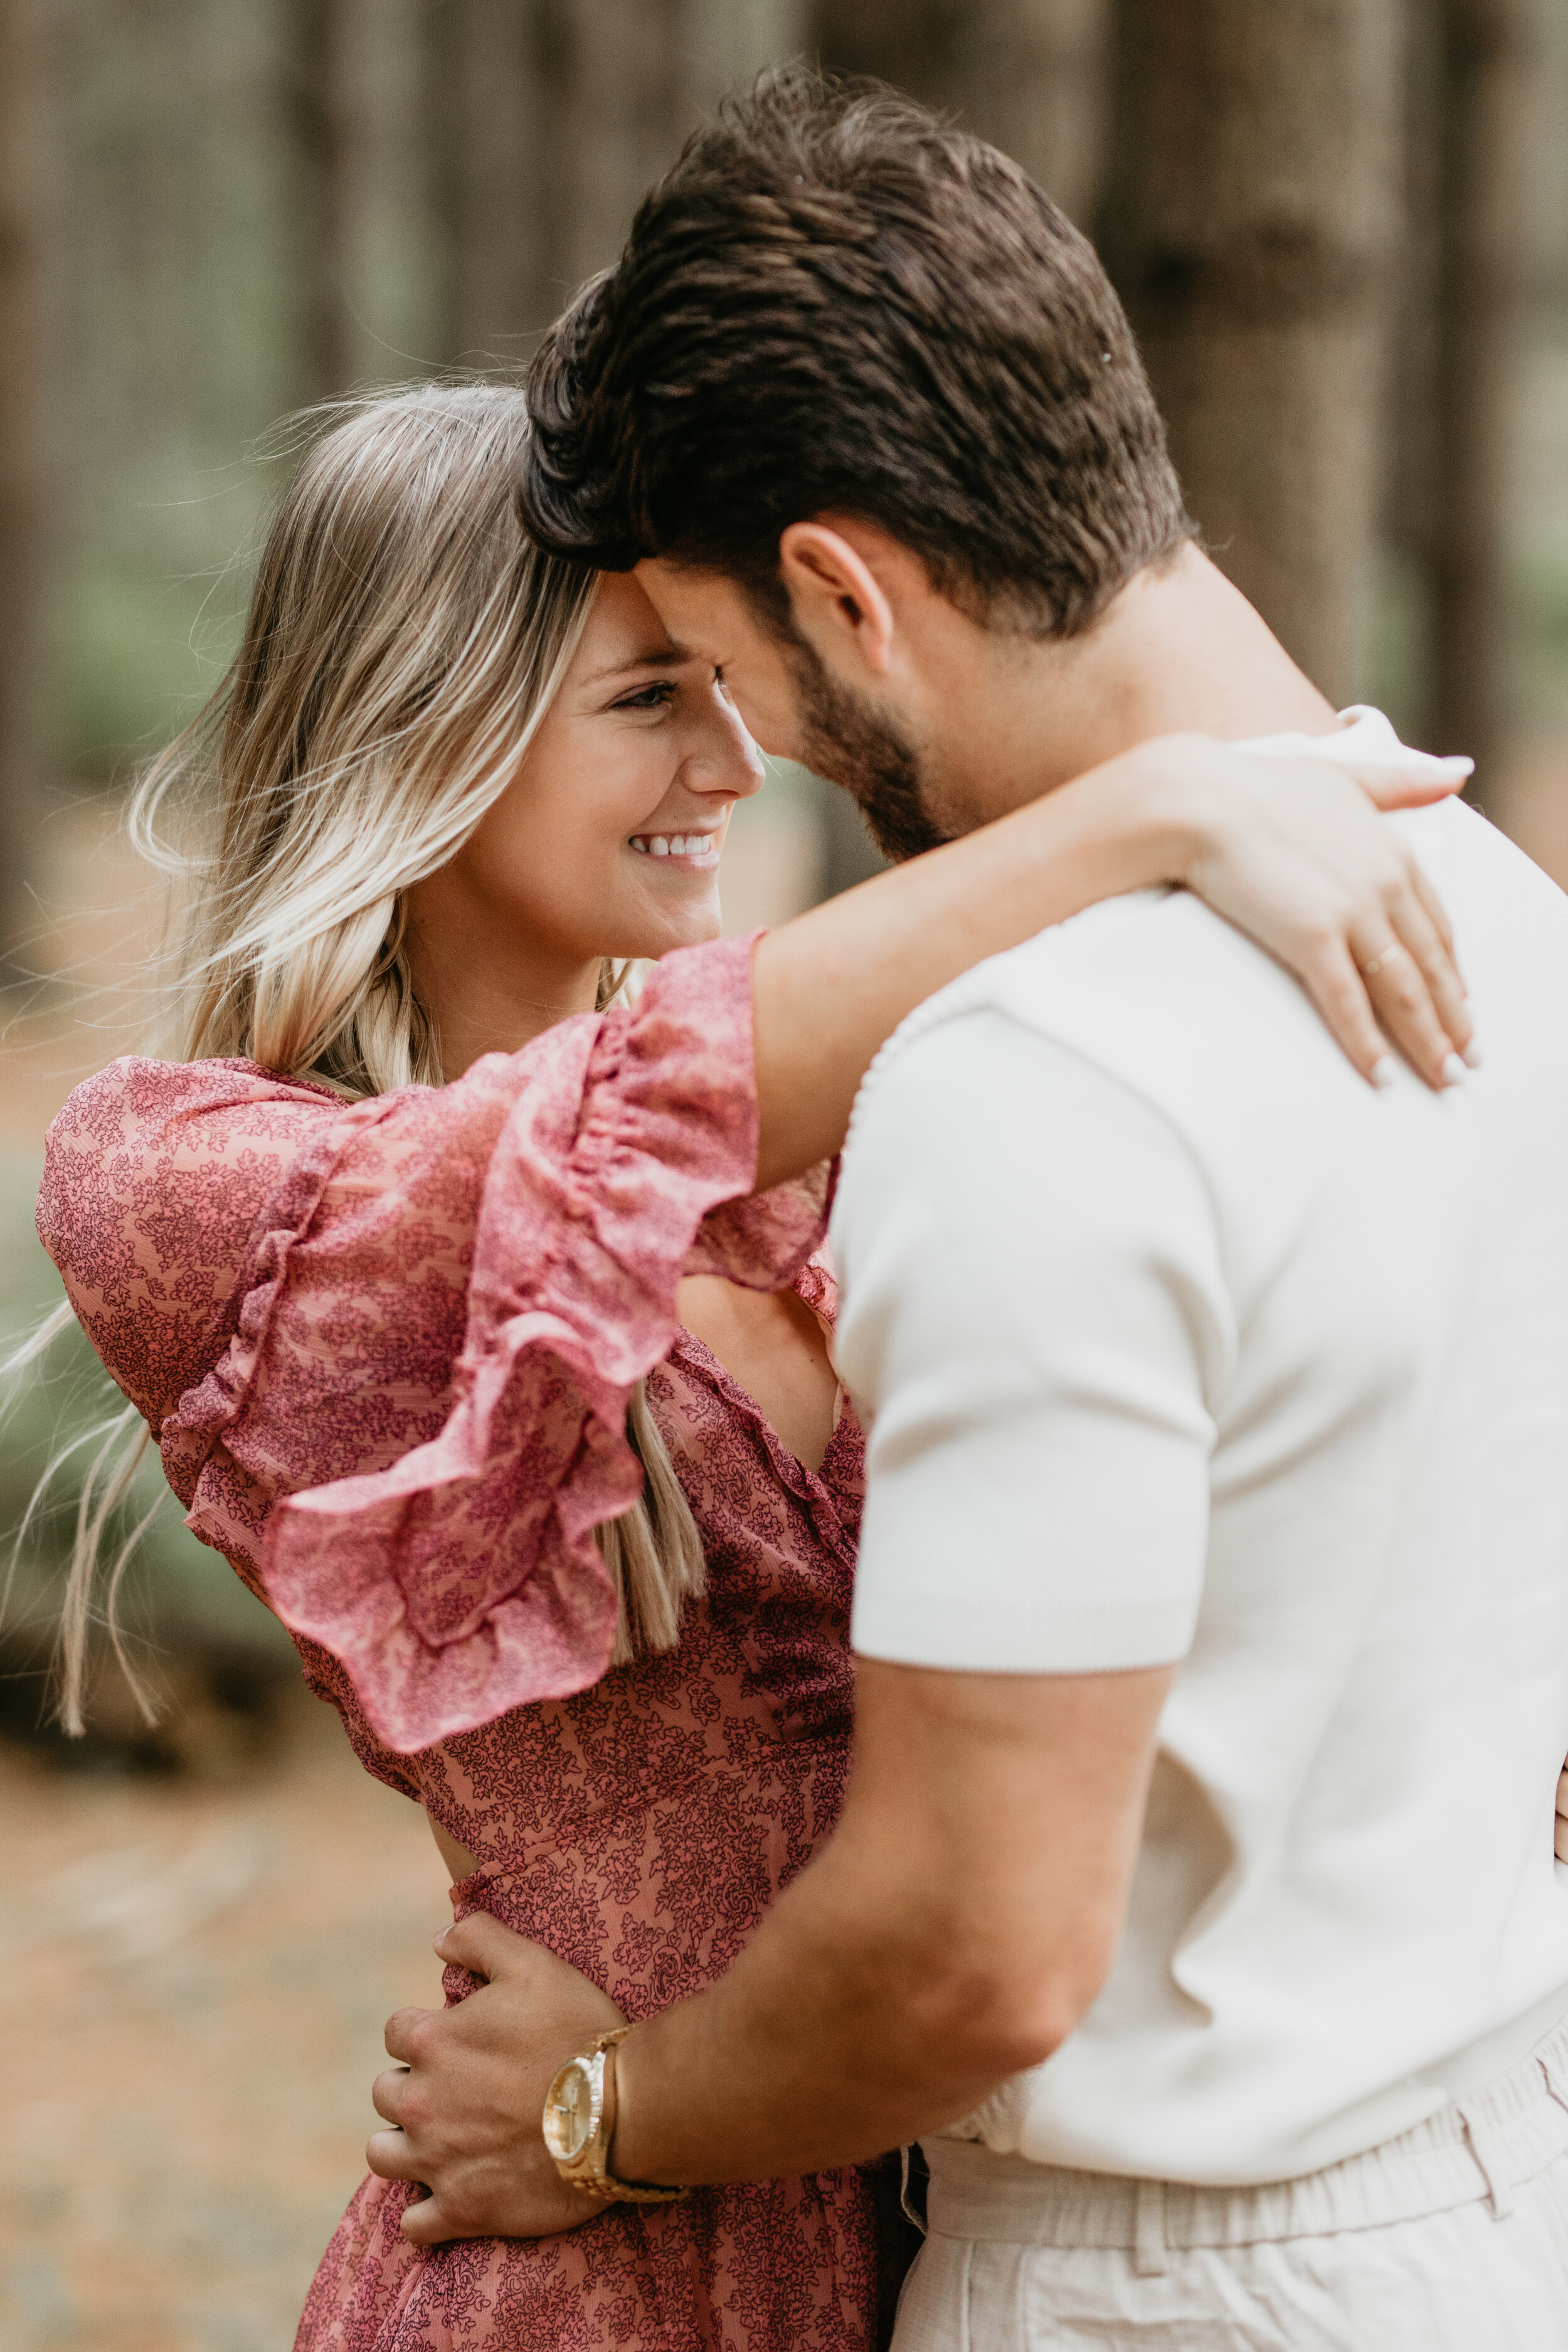 Nicole-Daacke-Photography-michaux-state-forest-elopement-adventure-engagement-session-pennsylvania-elopement-pa-elopement-photographer-gettysburg-photographer-state-park-elopement-engagement-session-pennsylvania-waterfall-101.jpg